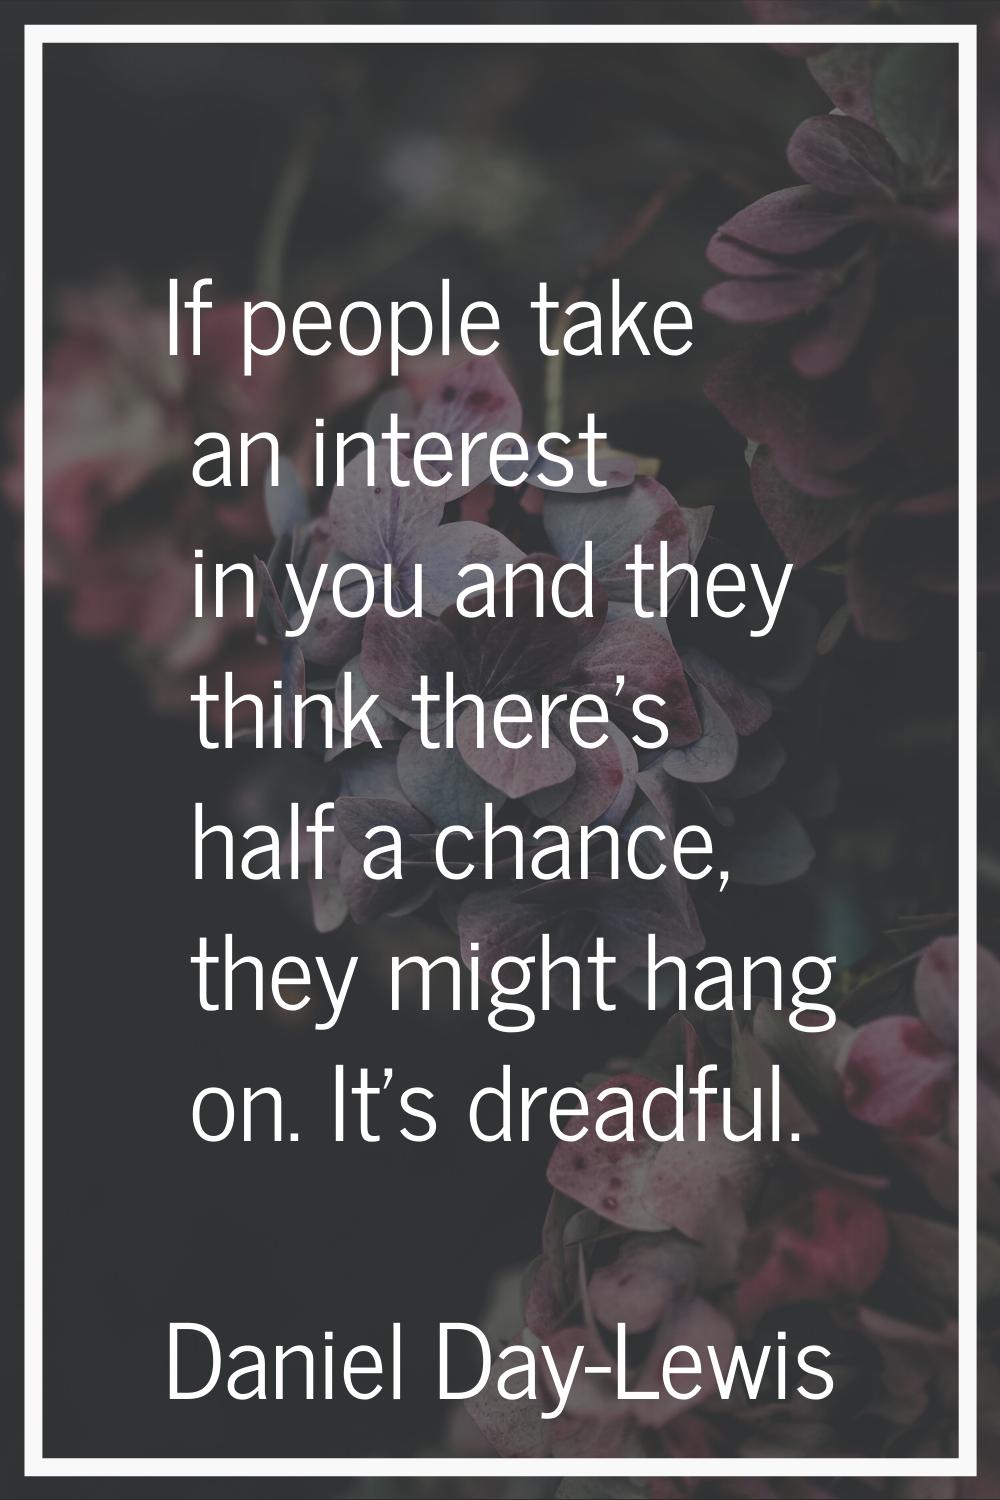 If people take an interest in you and they think there's half a chance, they might hang on. It's dr